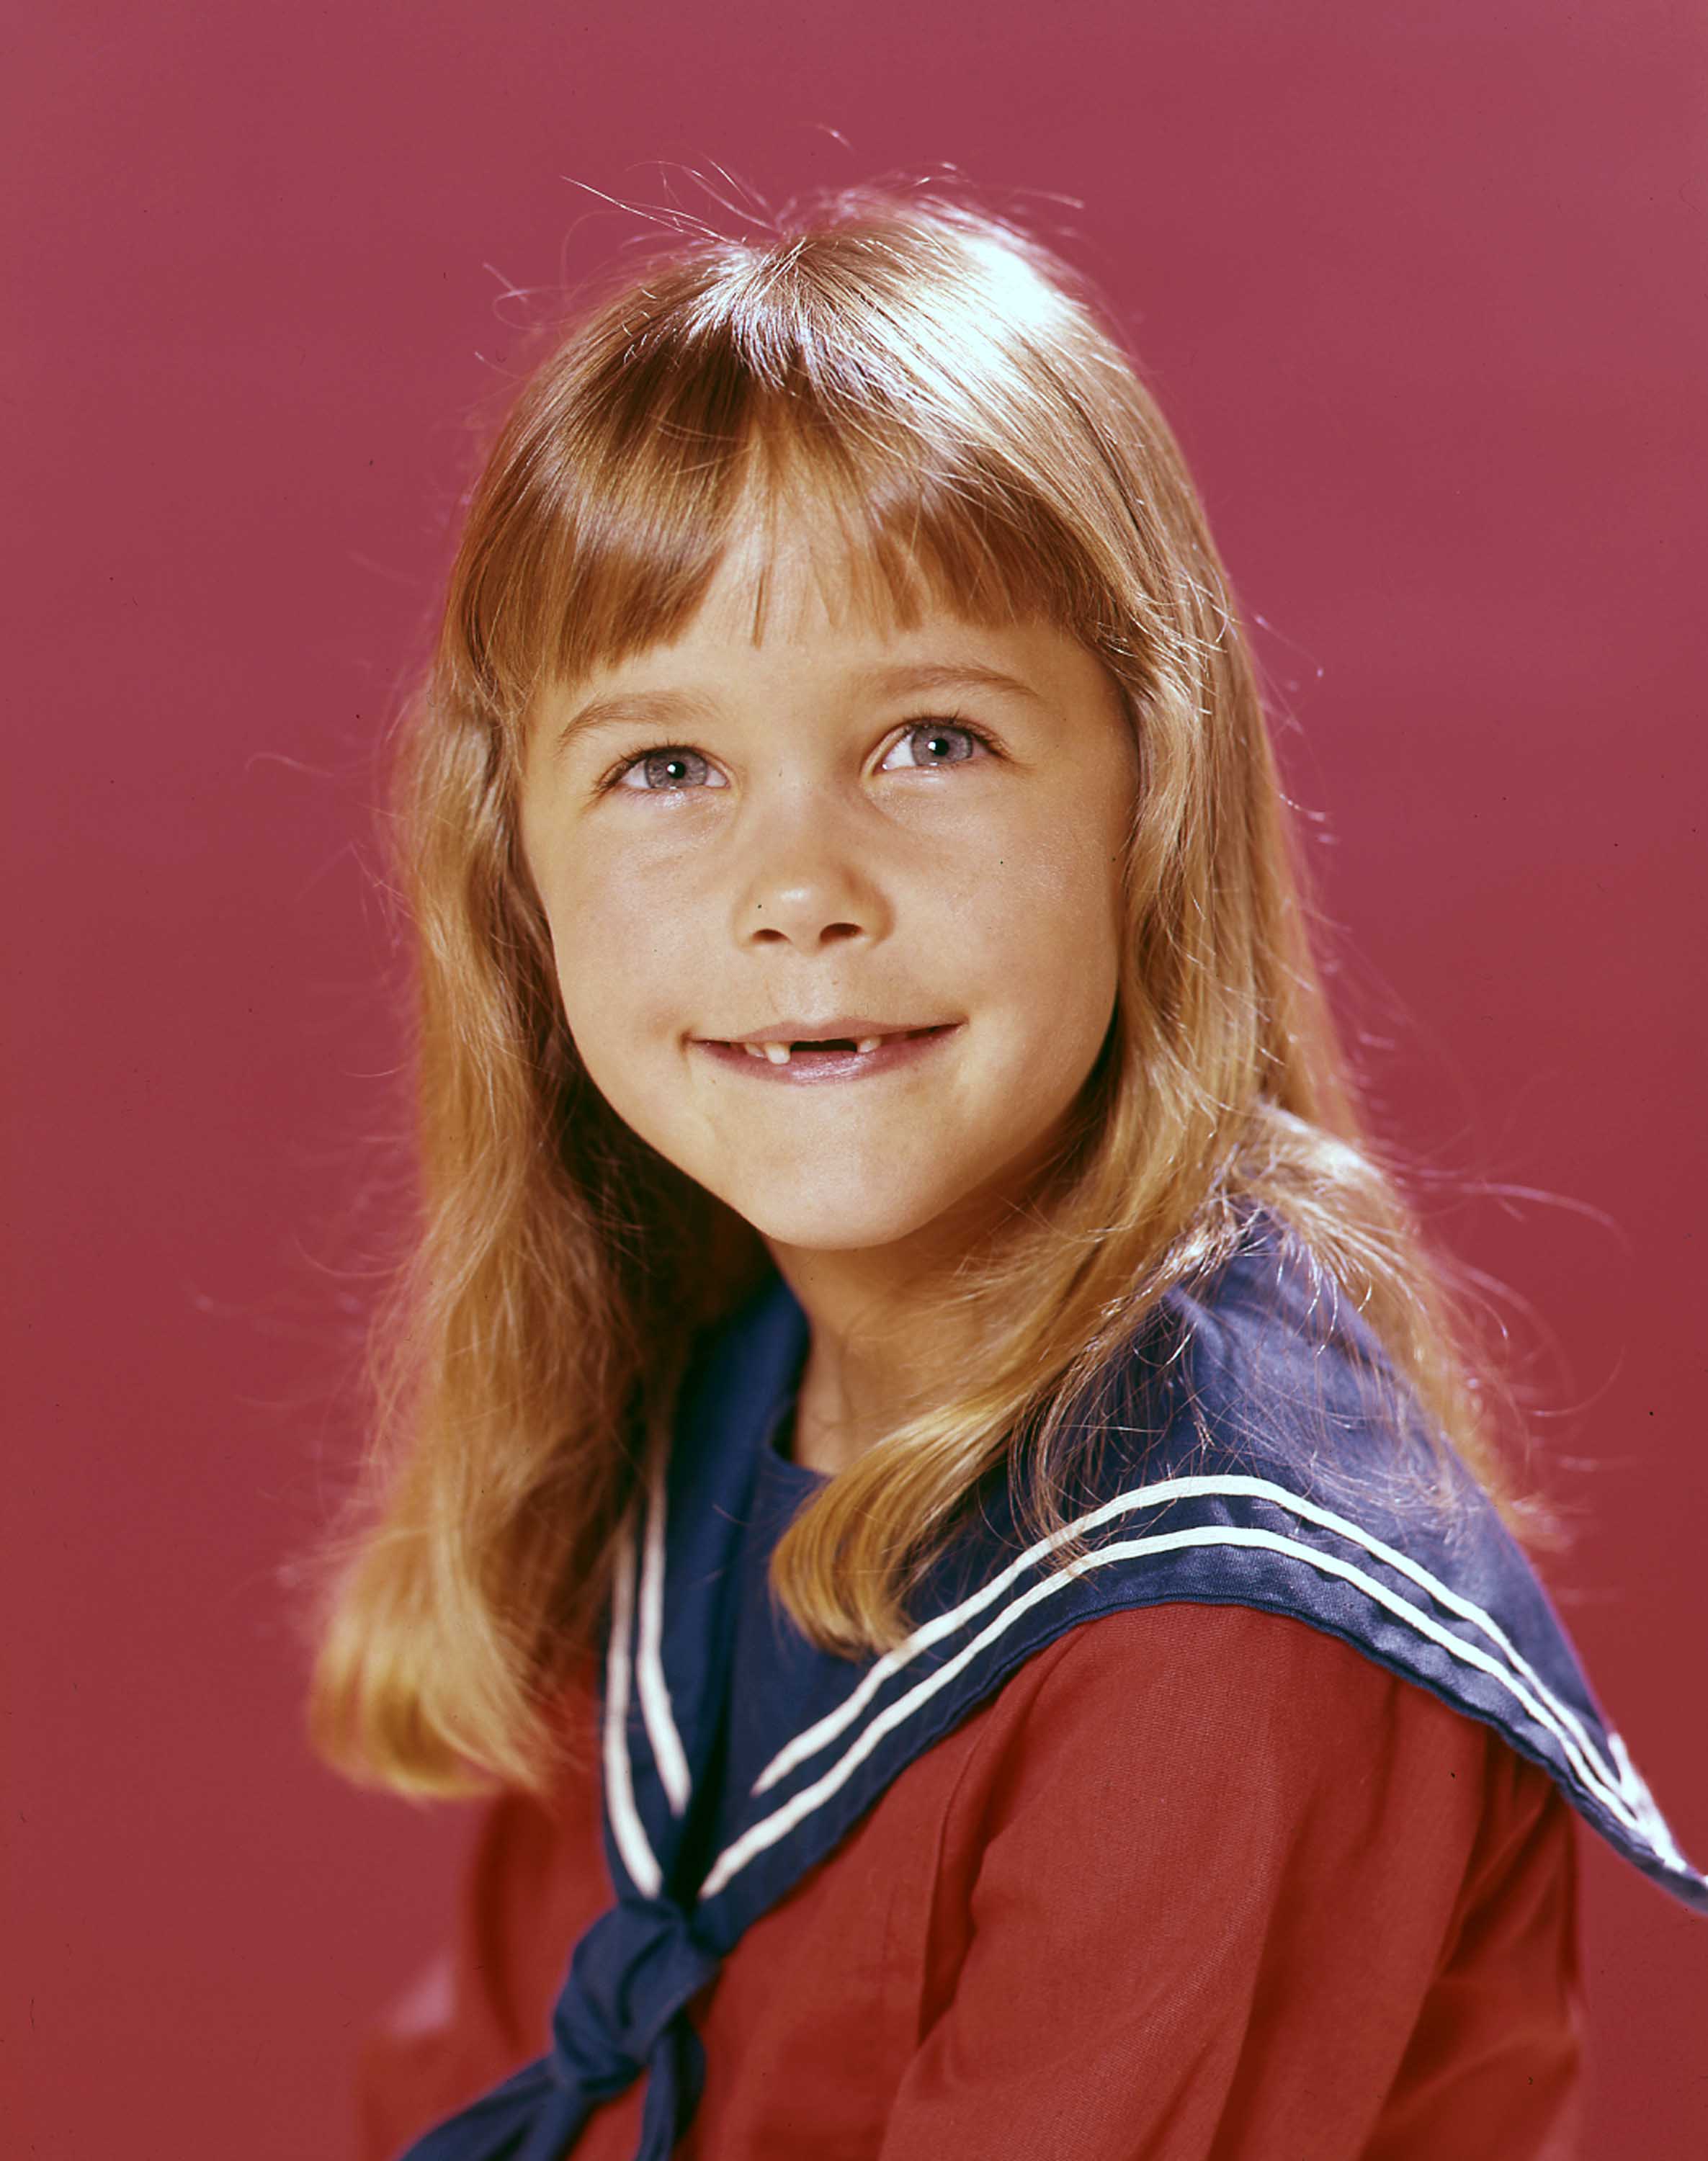 Actress Erin Murphy as young Tabitha Stephens during Season 8 of the TV show, "Bewitched," in 1971. / Source: Getty Images